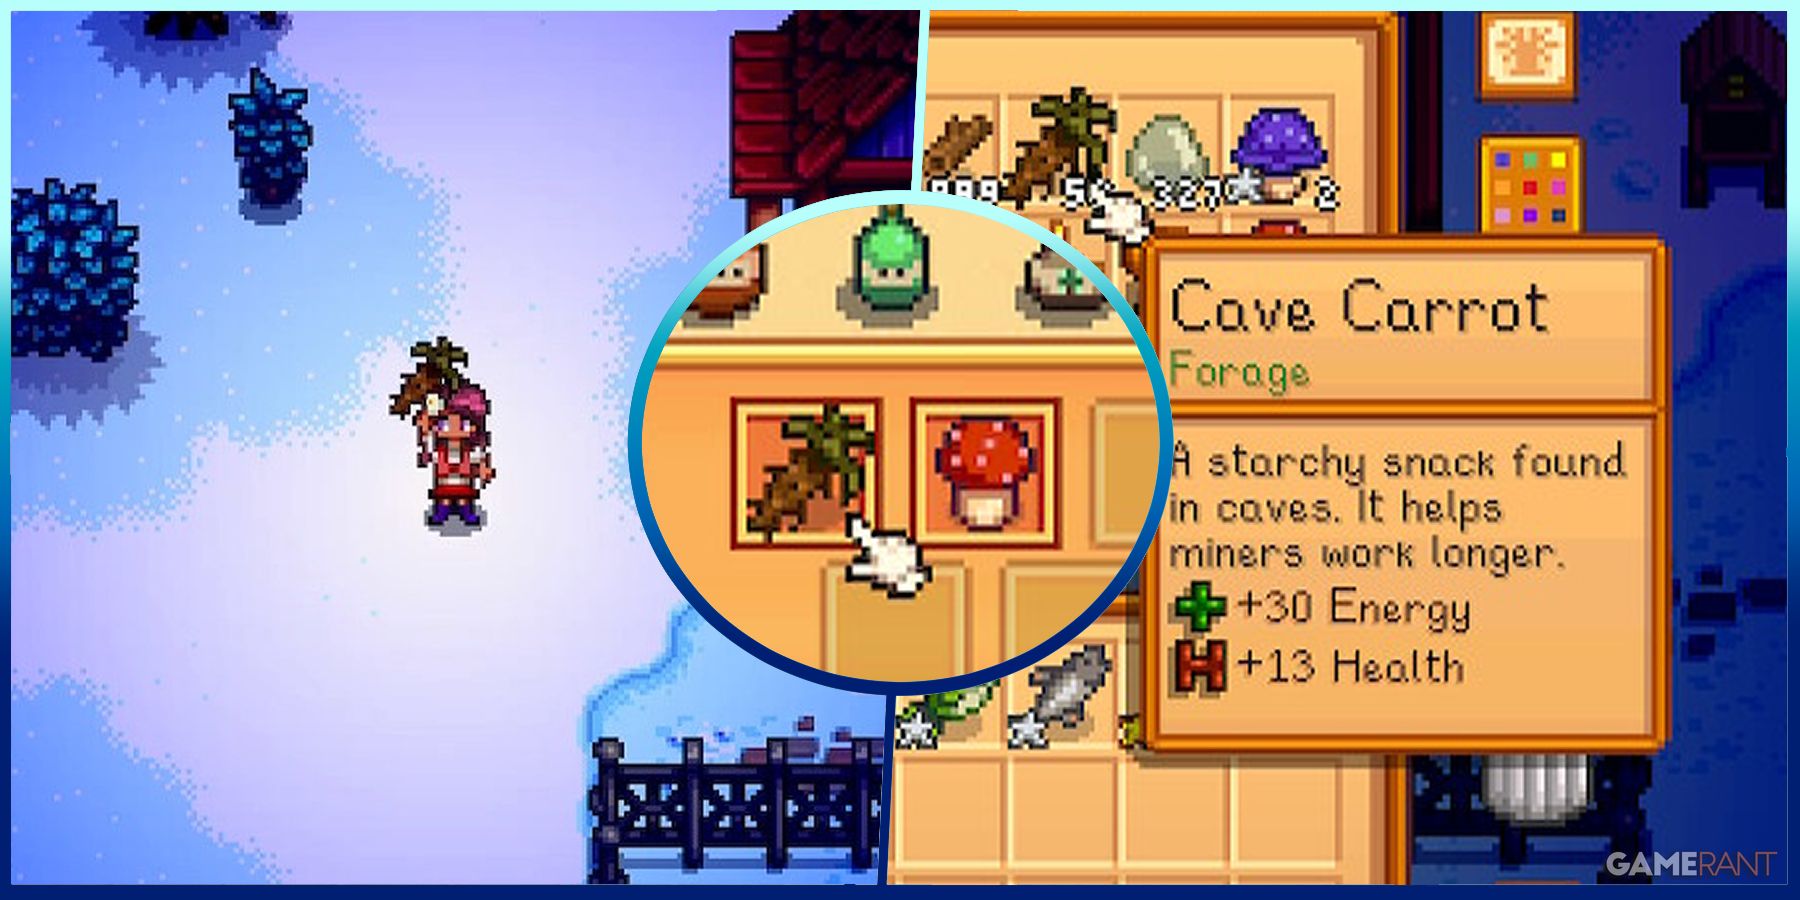 stardew valley how to get cave carrot_feature image